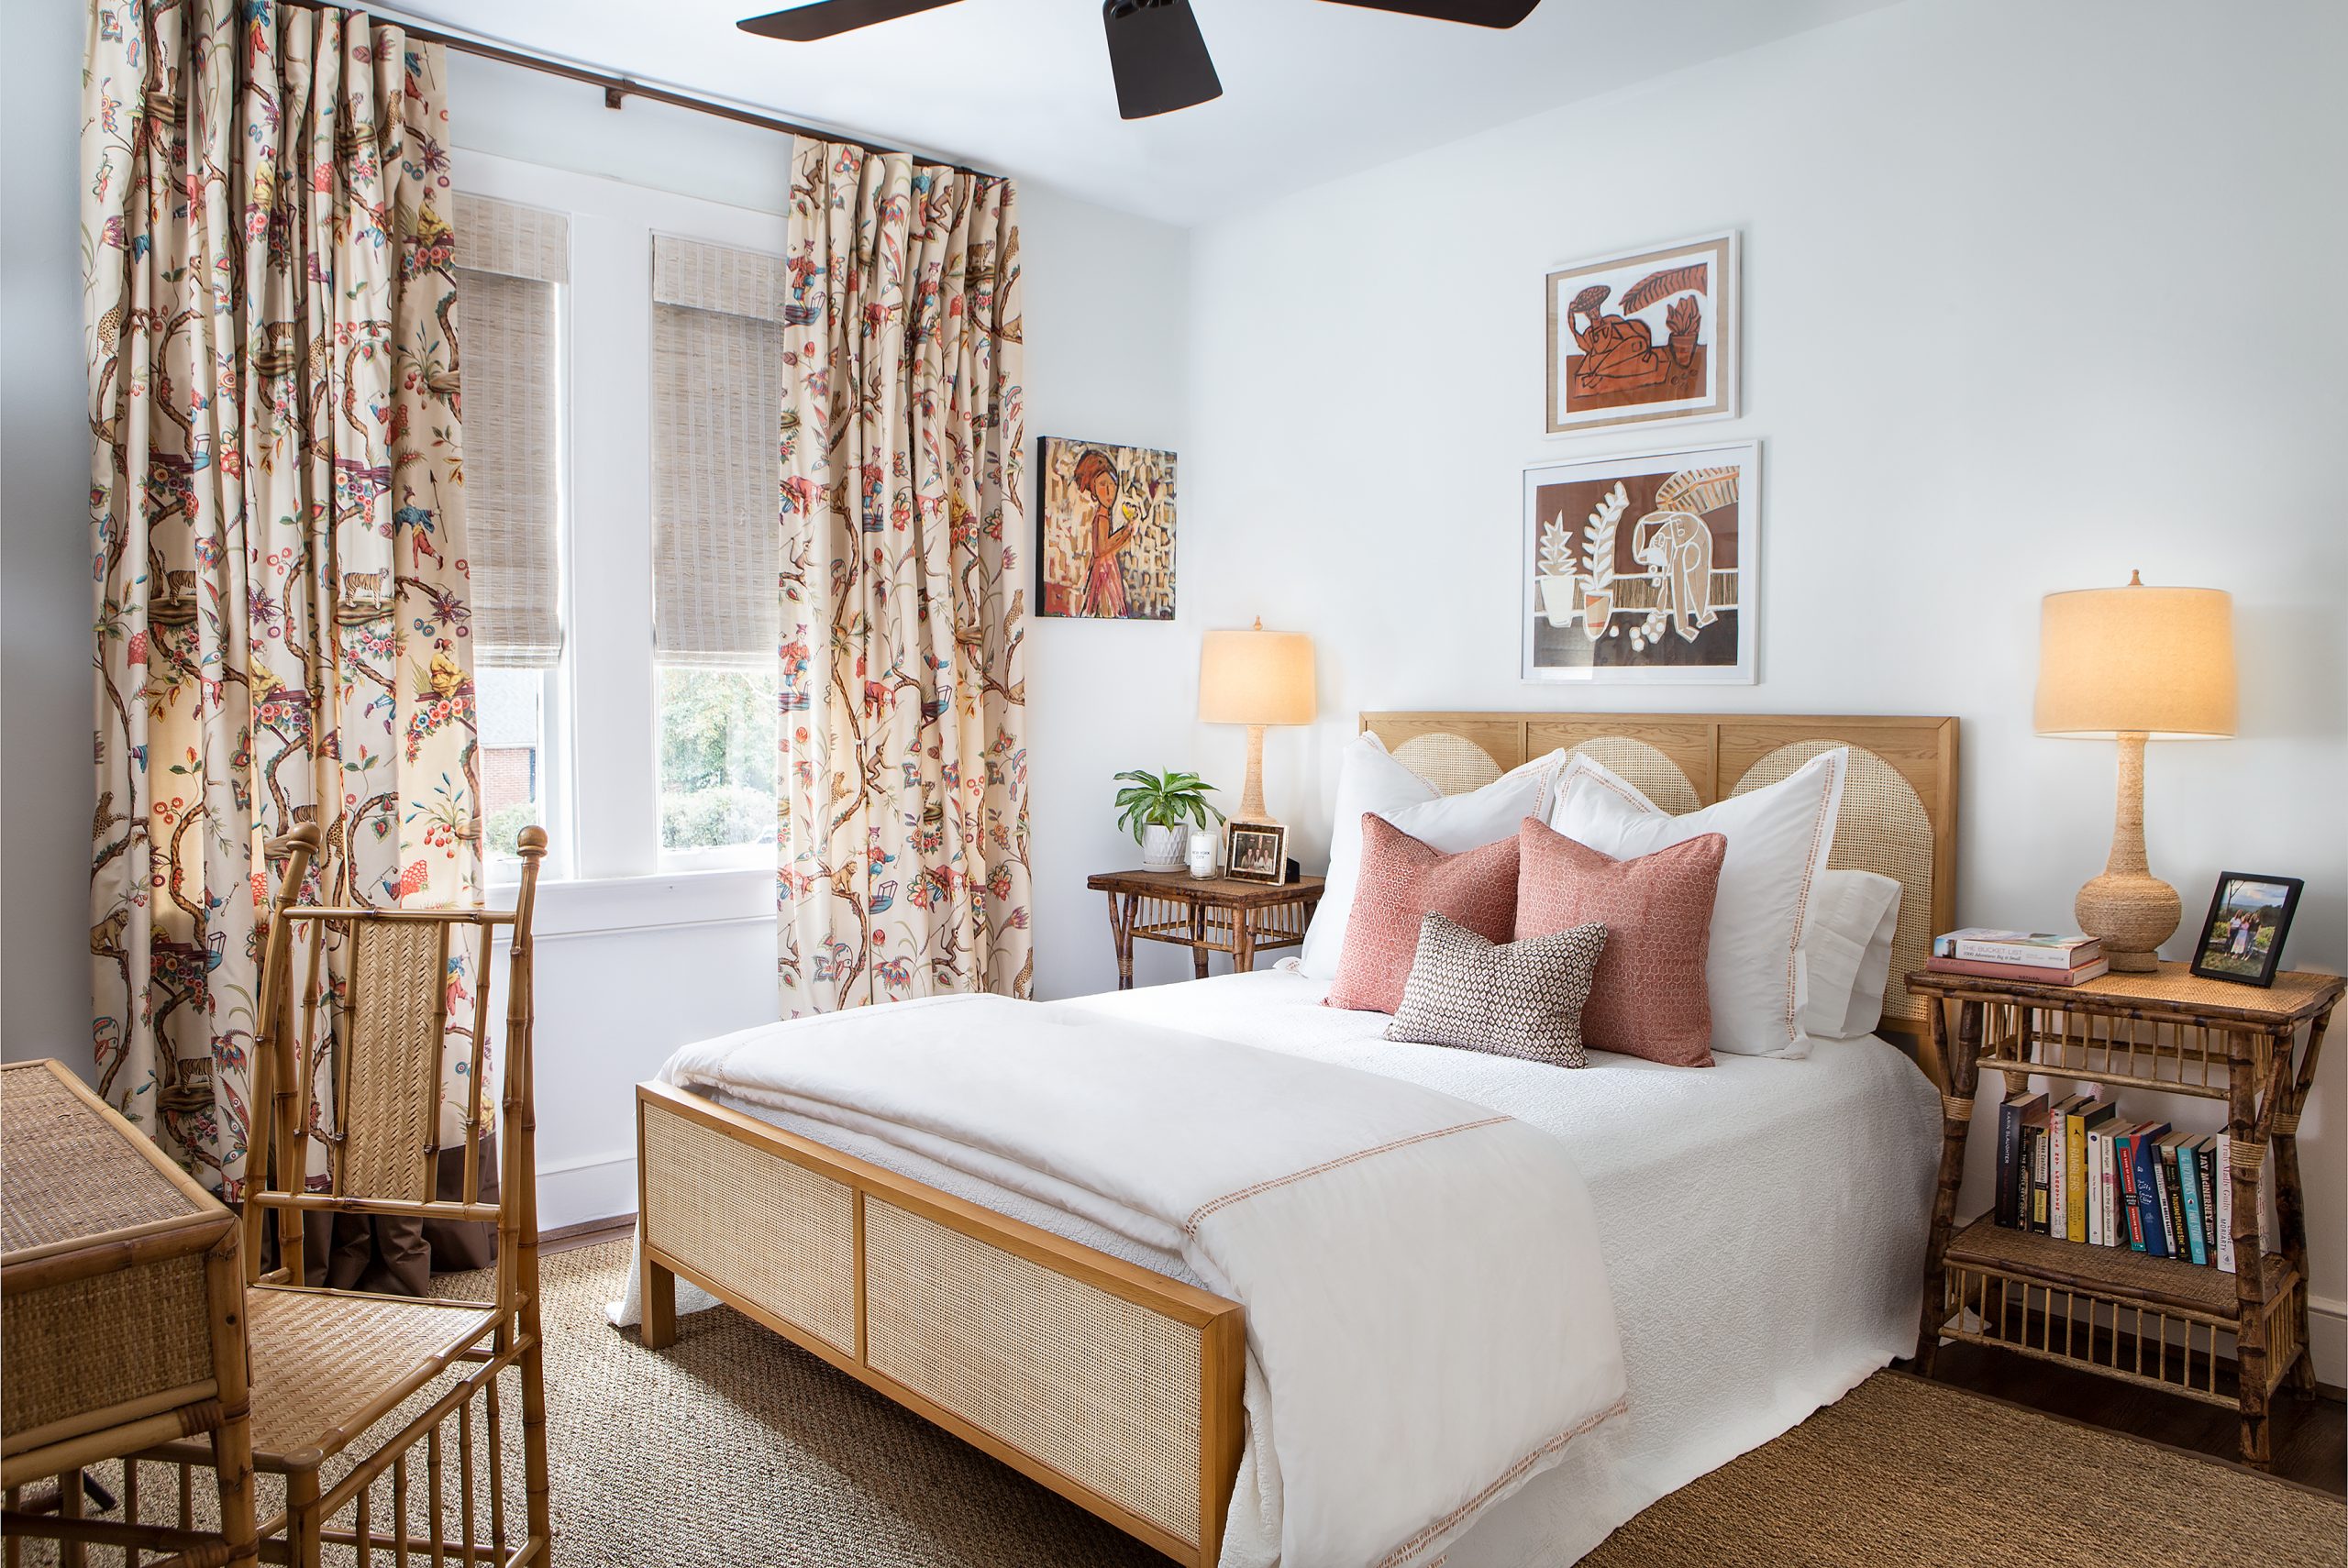 The guest room has an overall natural appeal with bamboo, grass, and cane. The focal point is the timeless Scalamandre chinoiserie drapes, repurposed from Mary Bond’s parents’ home. A painting by local artist Page Morris on the right captures the colors and ambiance perfectly. 